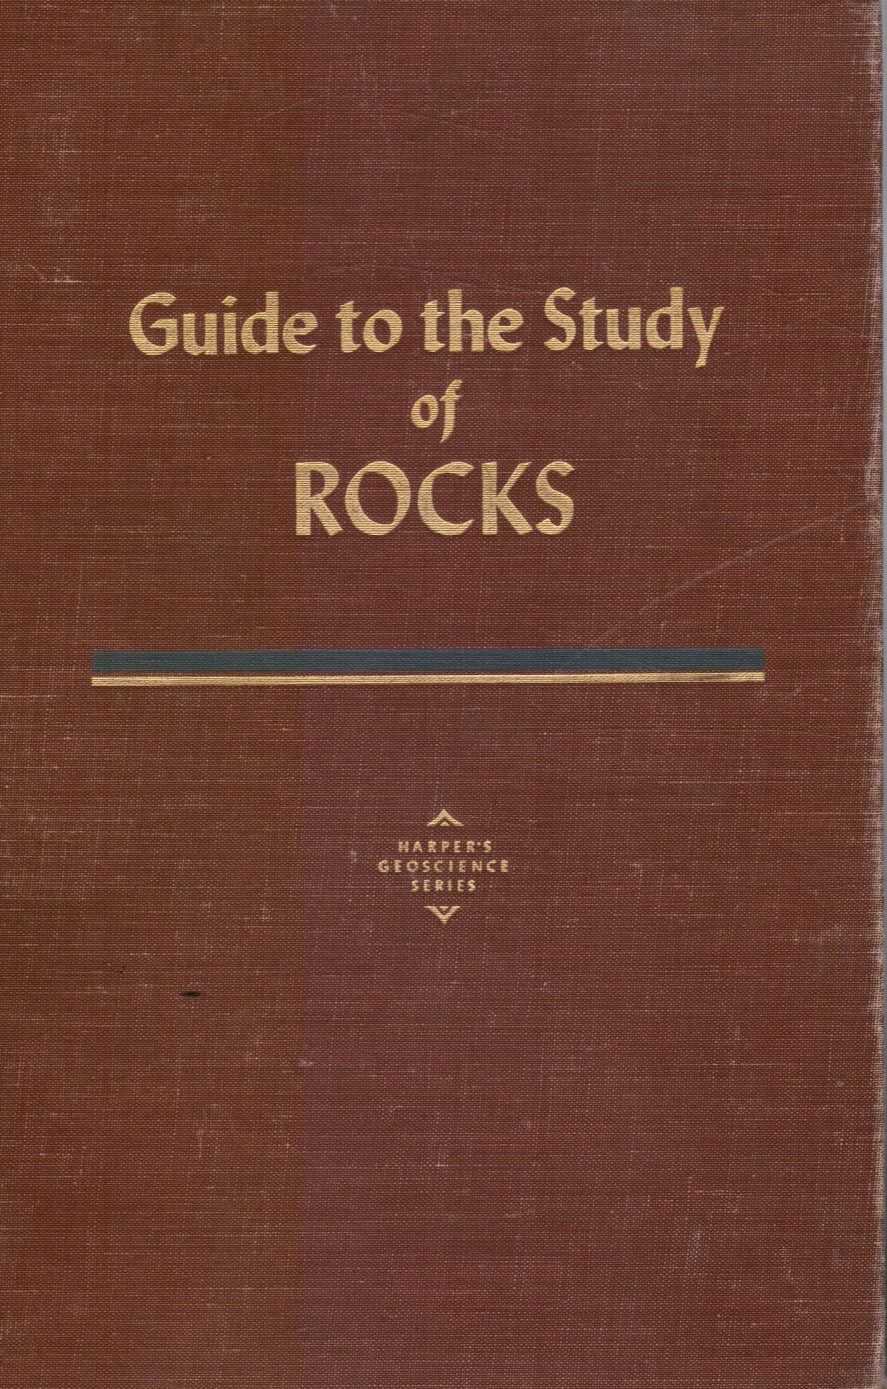 SPOCK, L. E. - Guide to the Study of Rocks